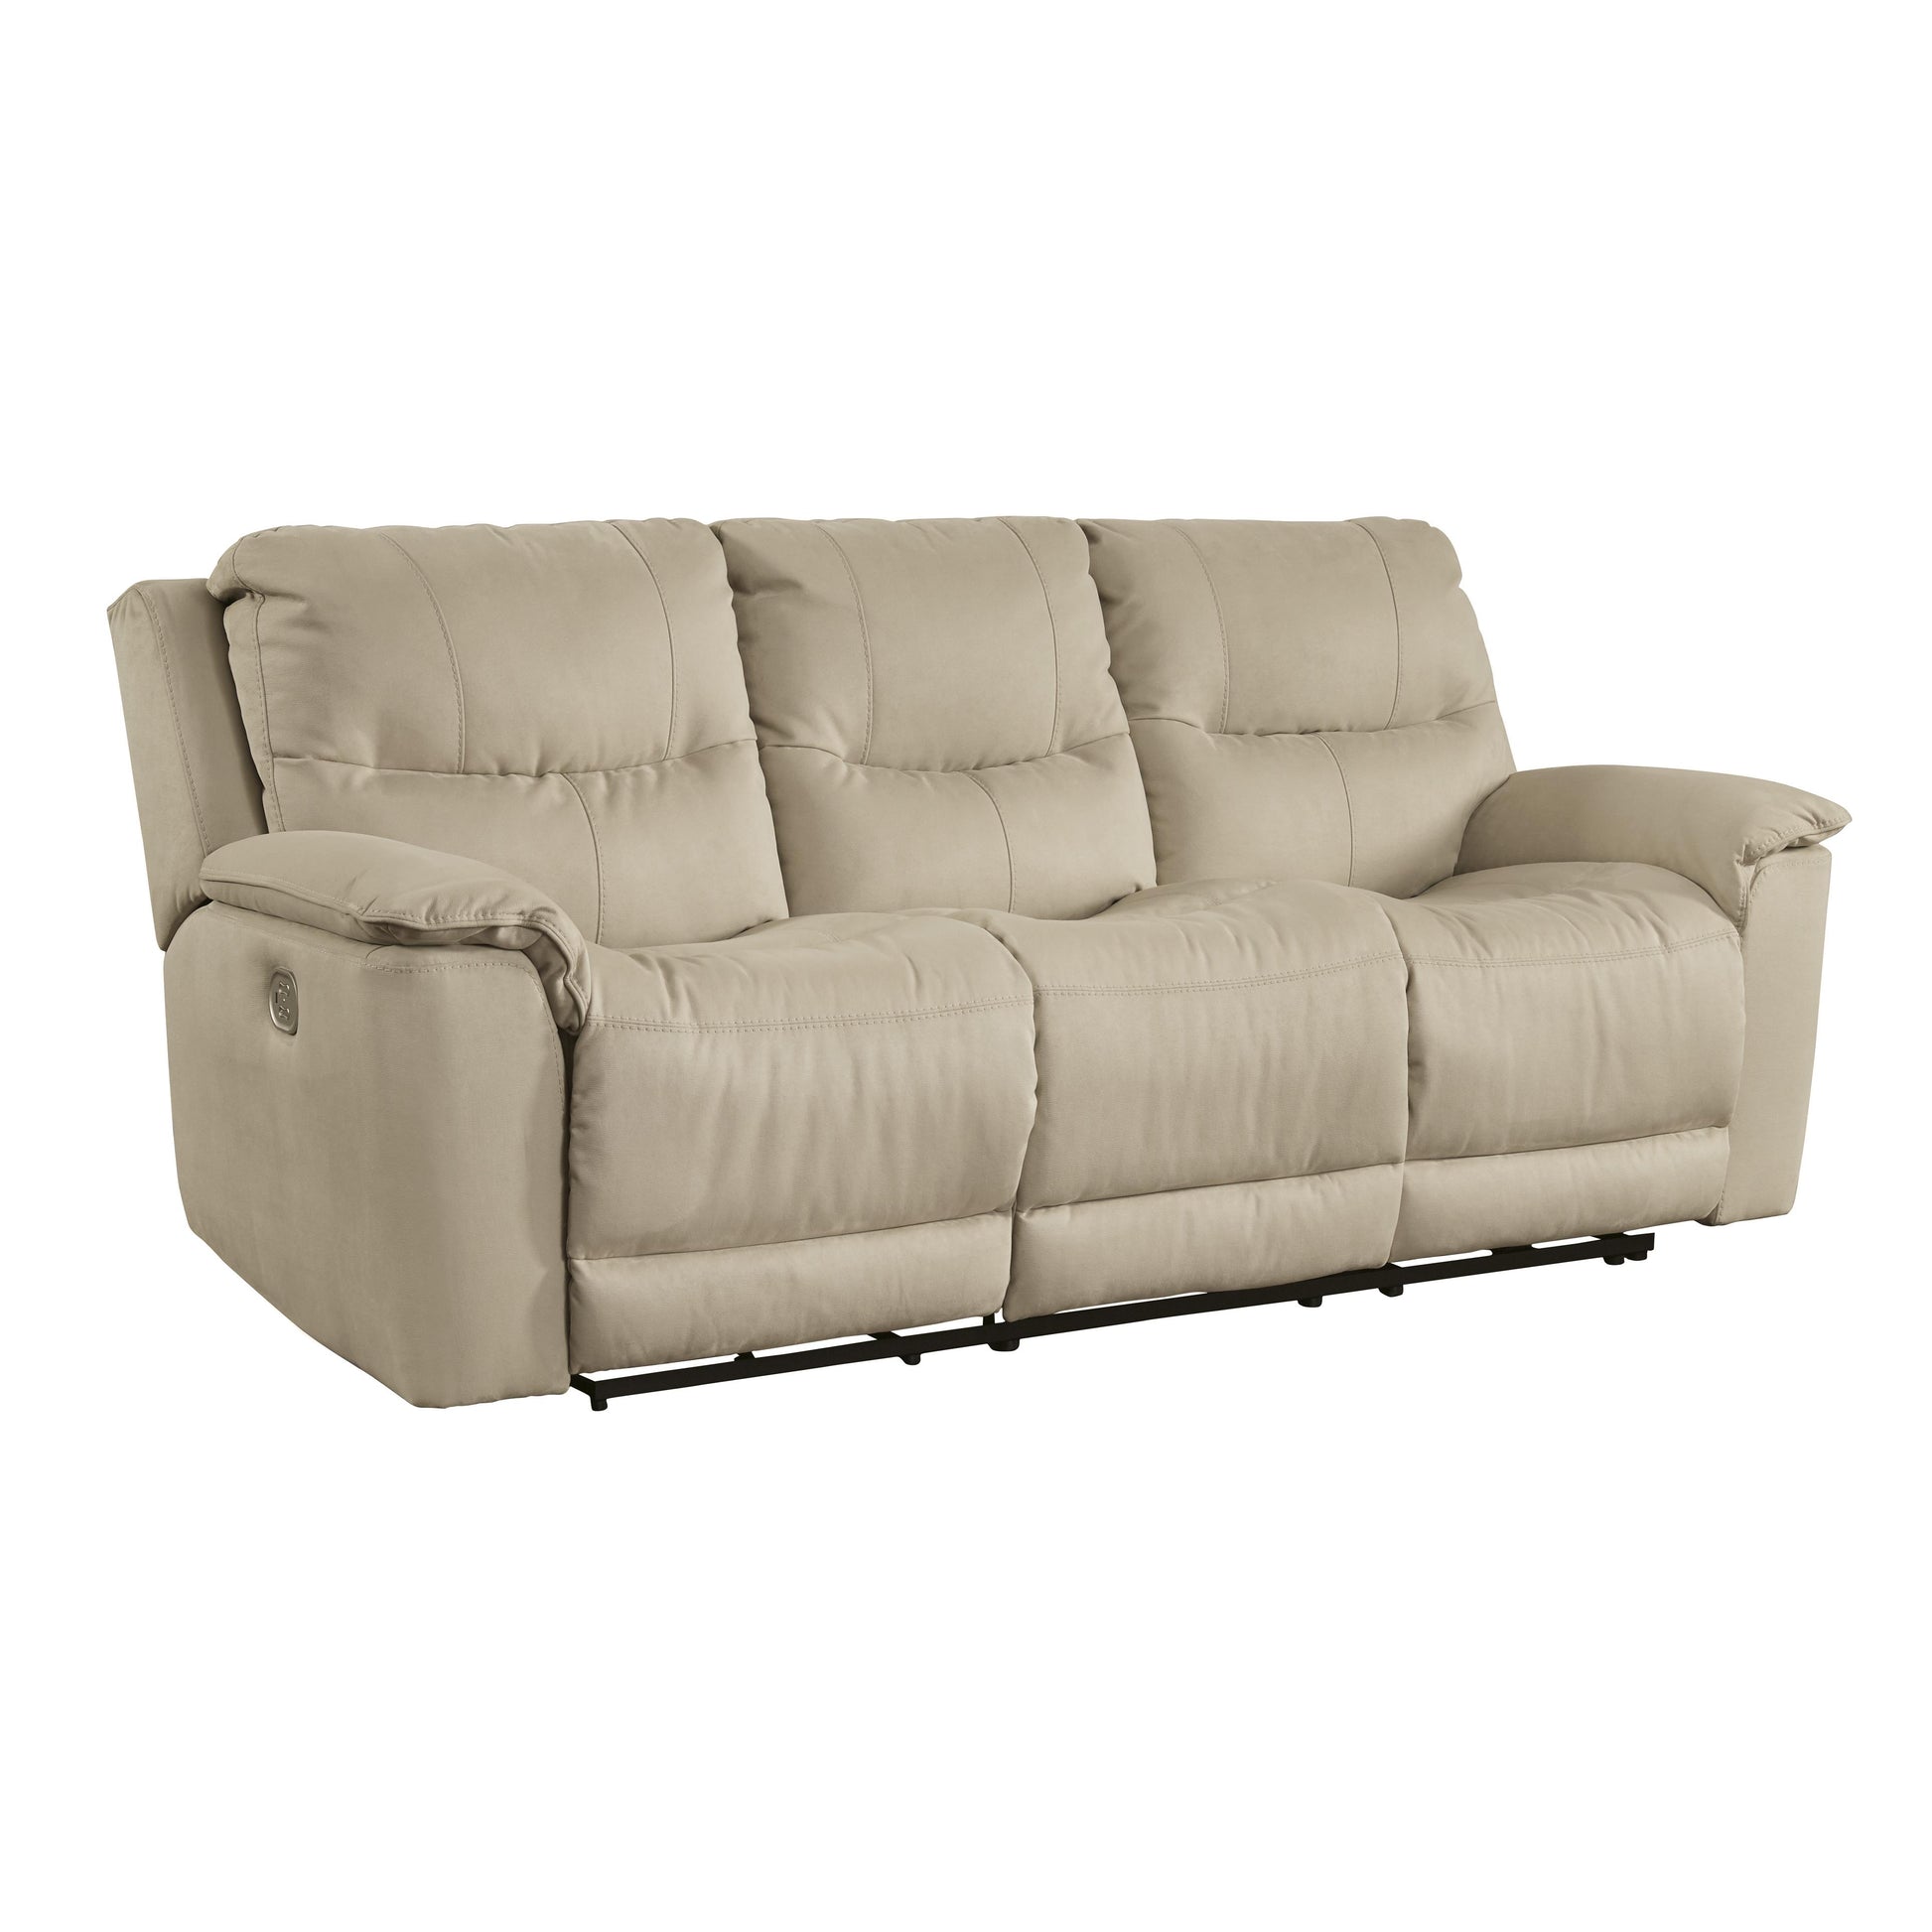 Signature Design by Ashley Next-Gen Gaucho Power Reclining Leather Look Sofa 6080715 IMAGE 1